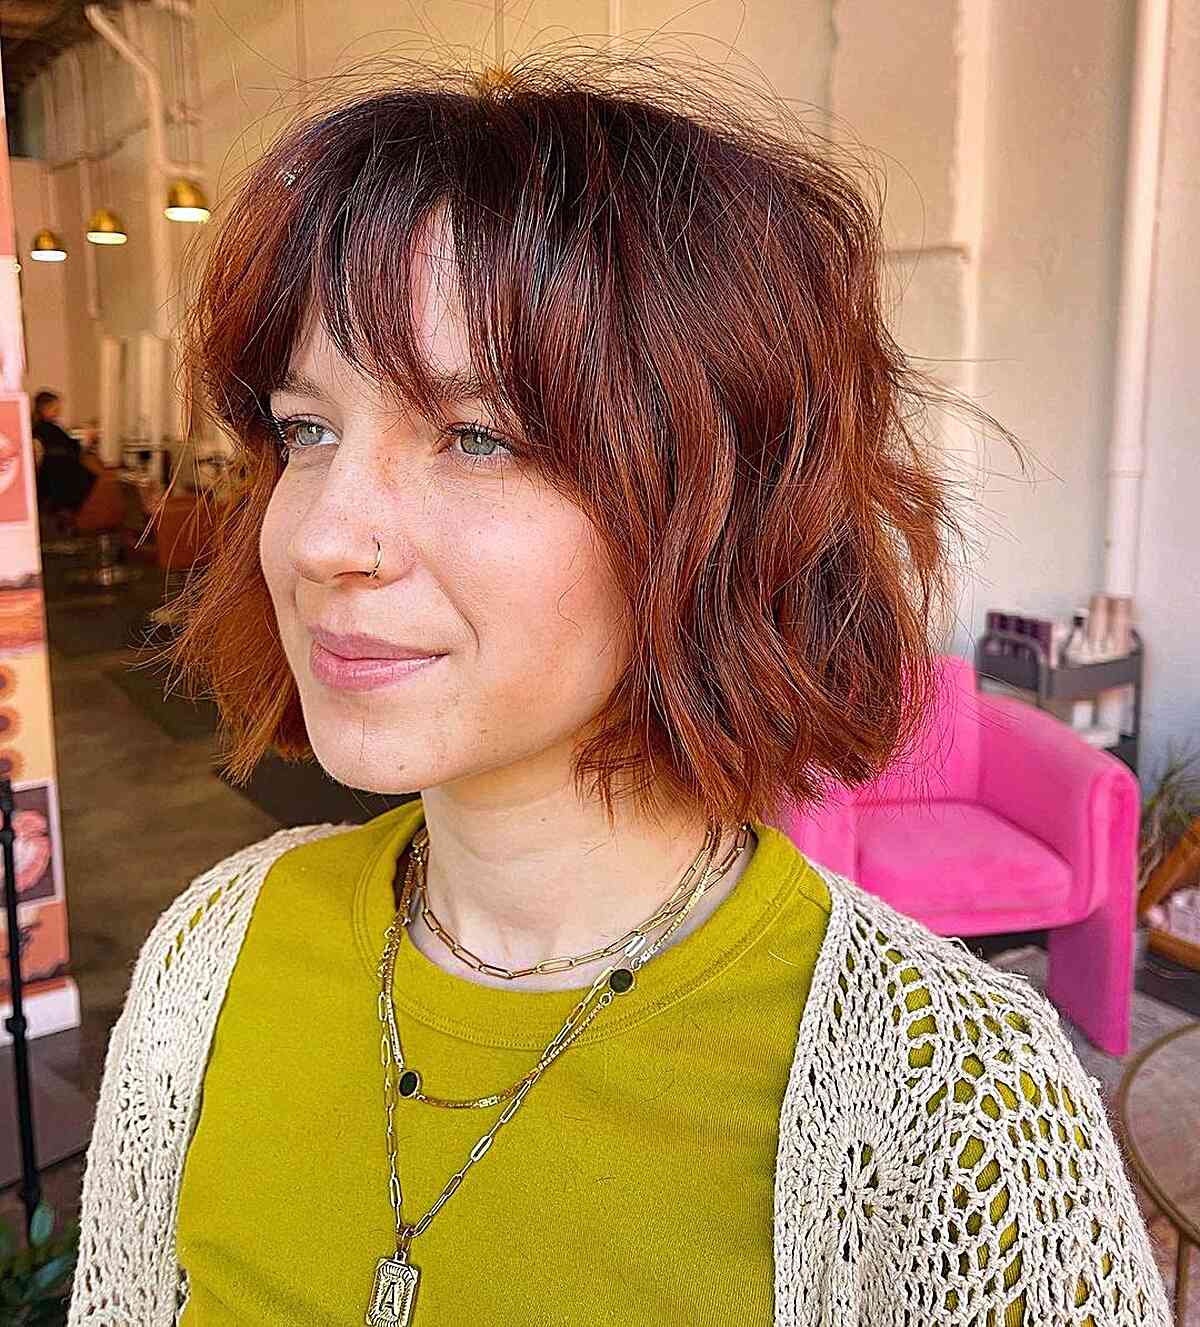 Jaw-Length Red Tousled Edgy Shaggy Choppy Bob with Light Bangs